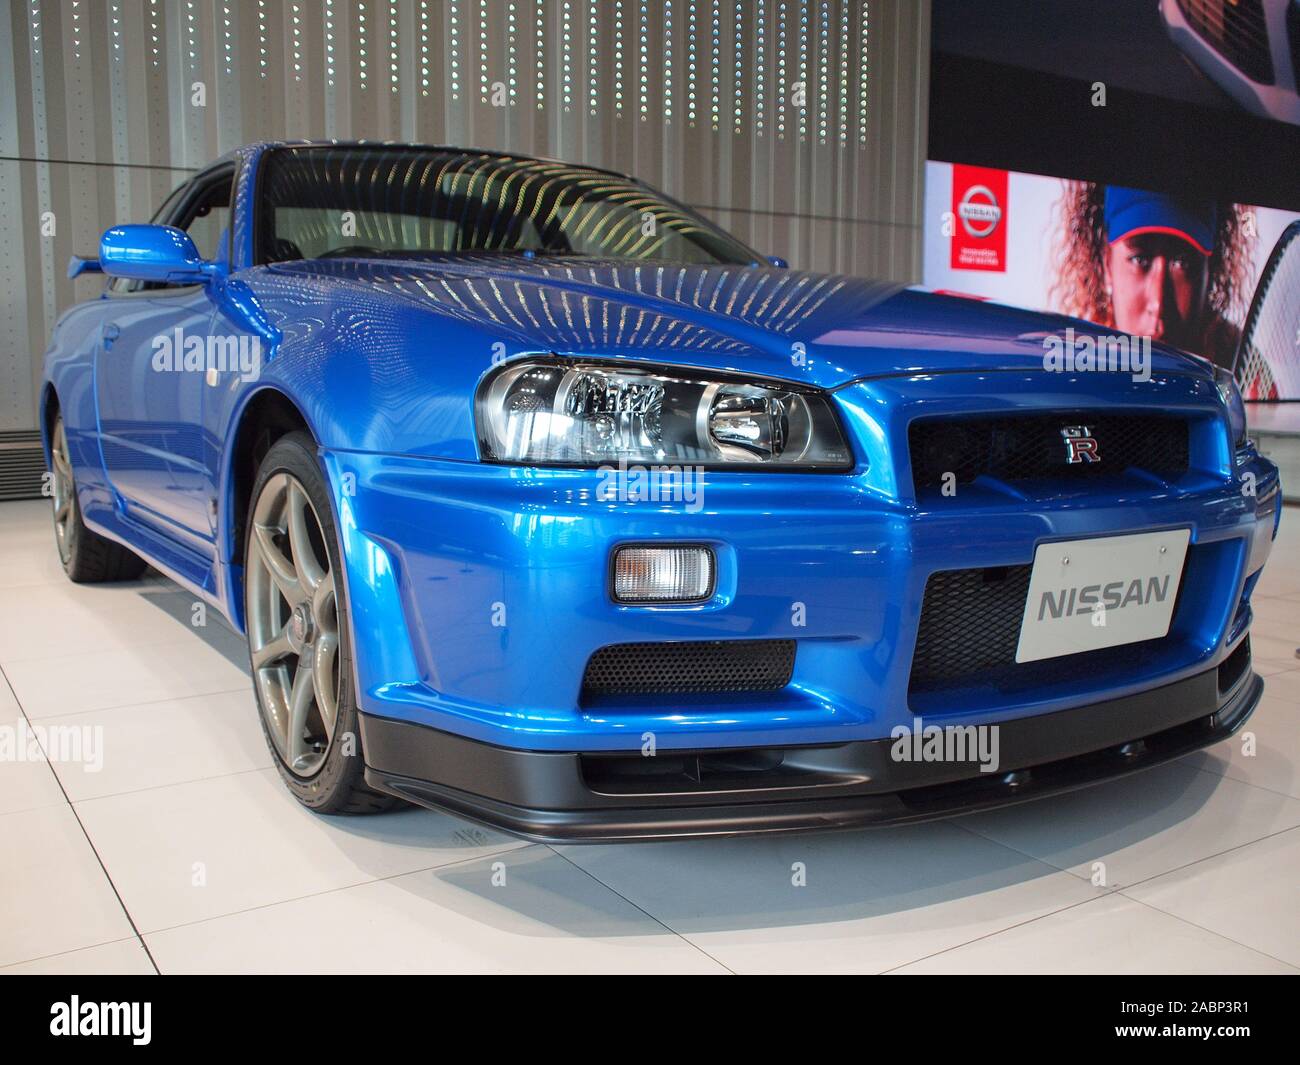 Yokohama Japan July 2nd 19 00 Nissan Skyline Gt R V Spec Ii One Of The Cars Exhibited At The Nissan Global Headquarters Gallery Stock Photo Alamy